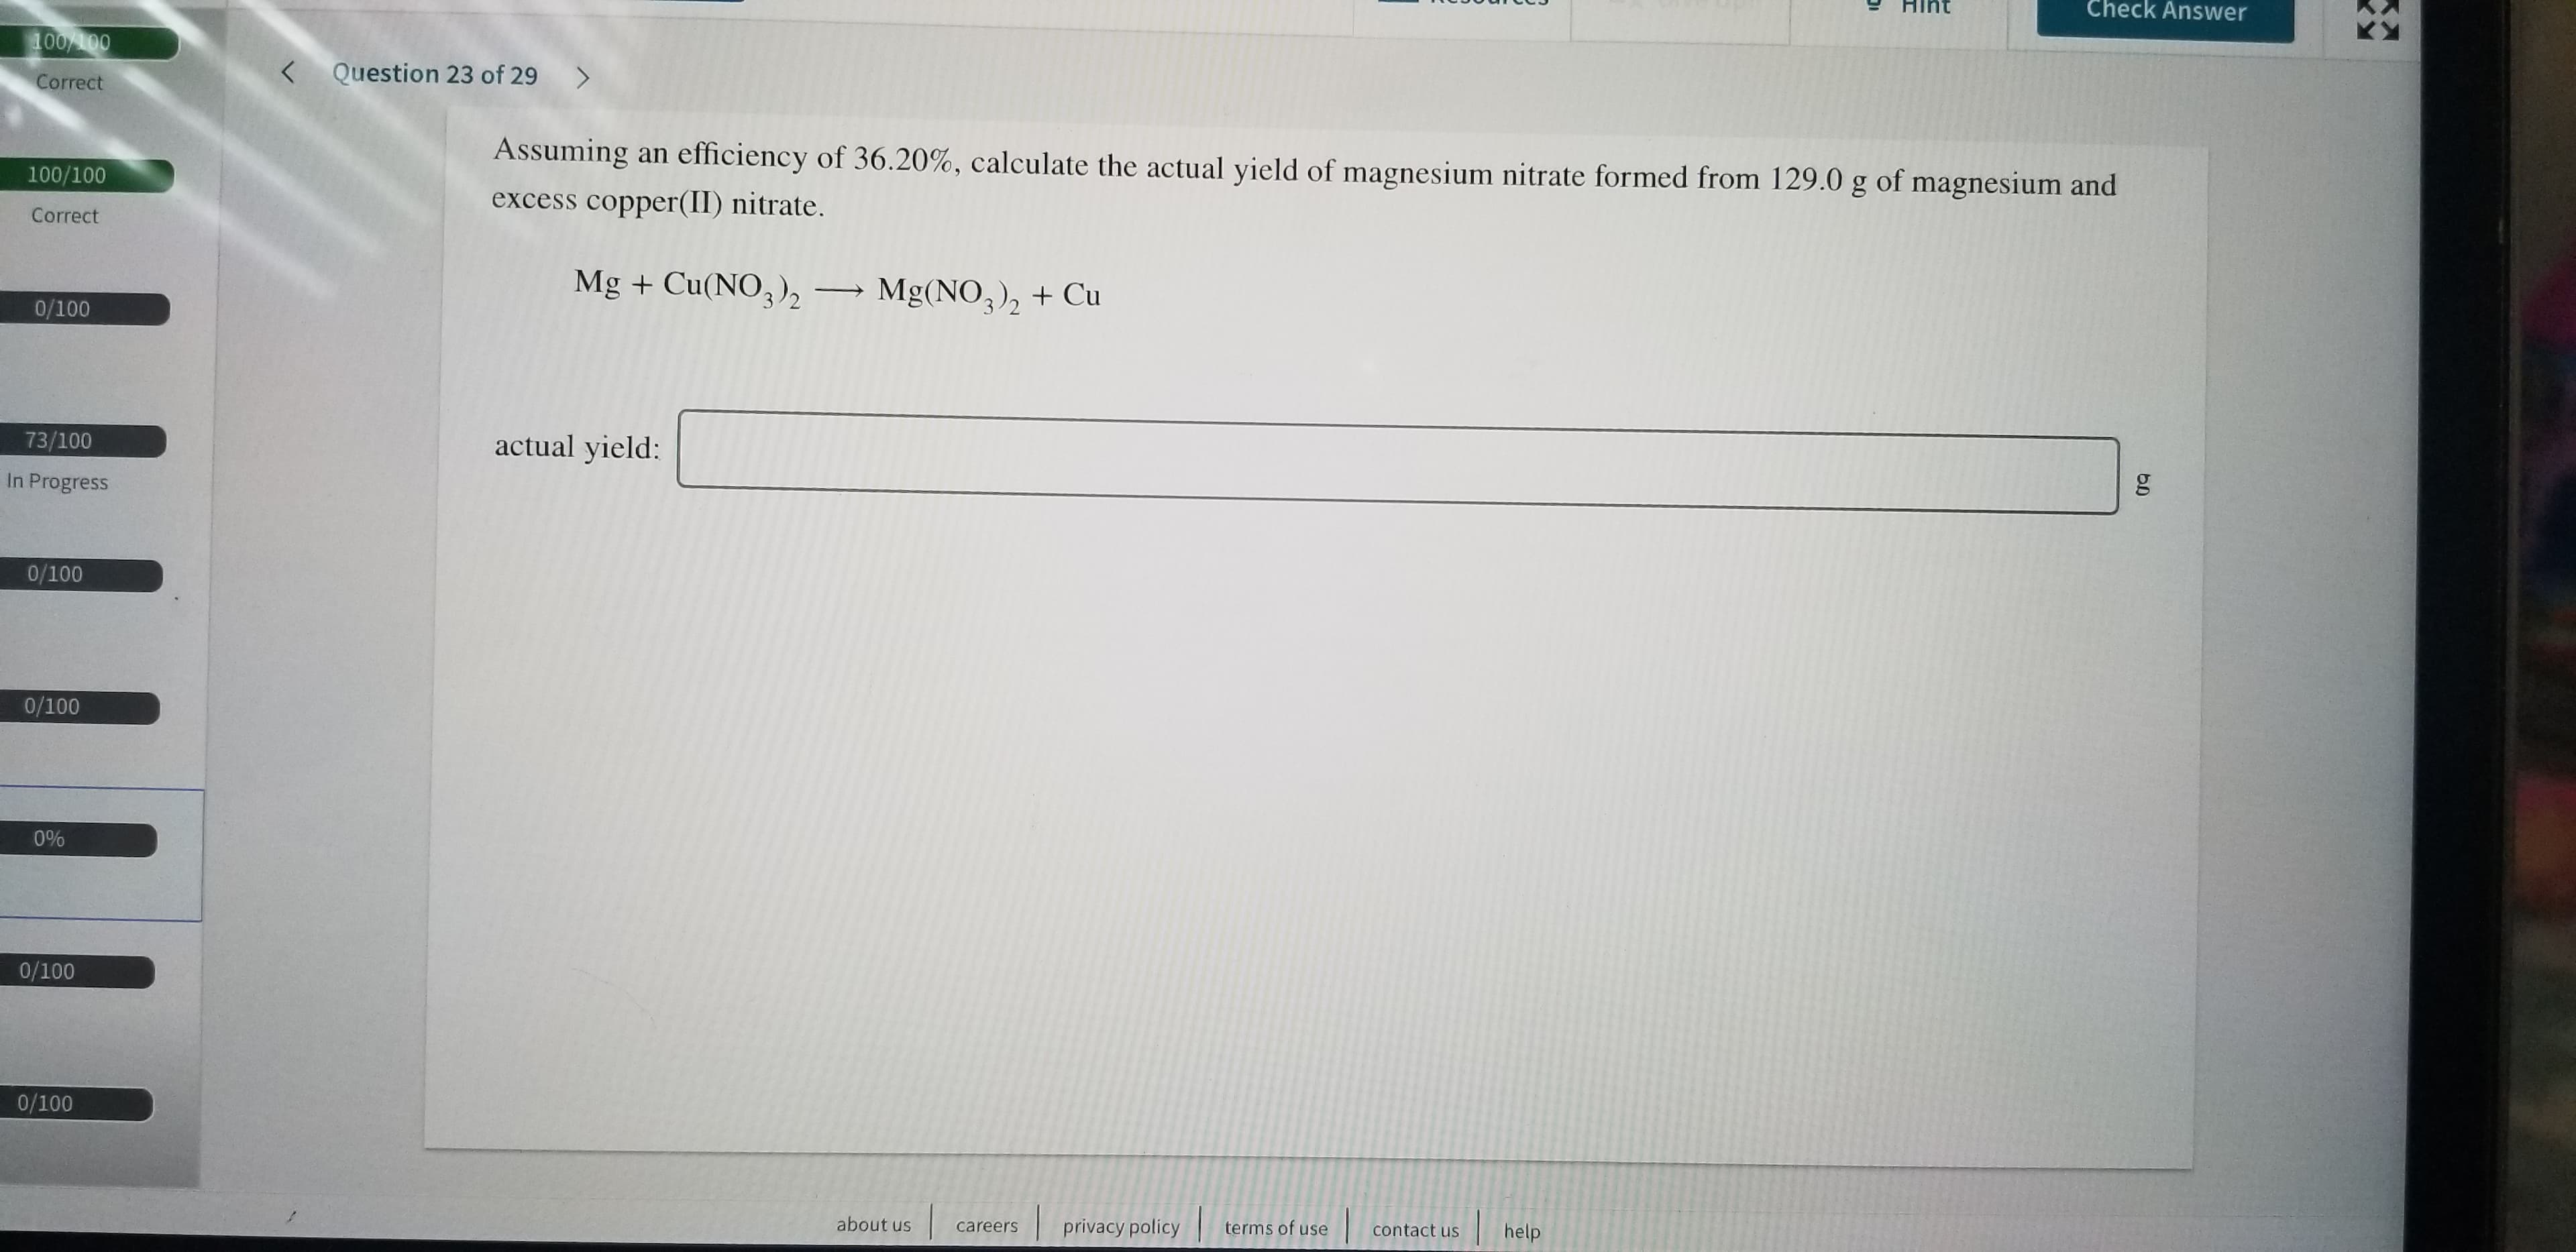 Check Answer
100%100
Question 23 of 29
<
Correct
Assuming an efficiency of 36.20 %, calculate the actual yield of magnesium nitrate formed from 129.0 g of magnesium and
100/100
excess copper(II) nitrate.
Correct
Mg +Cu(NO3)2
Mg(NO3)2+Cu
0/100
actual yield:
73/100
In Progress
0/100
0/100
0%
0/100
0/100
help
contact us
terms of use
privacy policy
about us
careers
